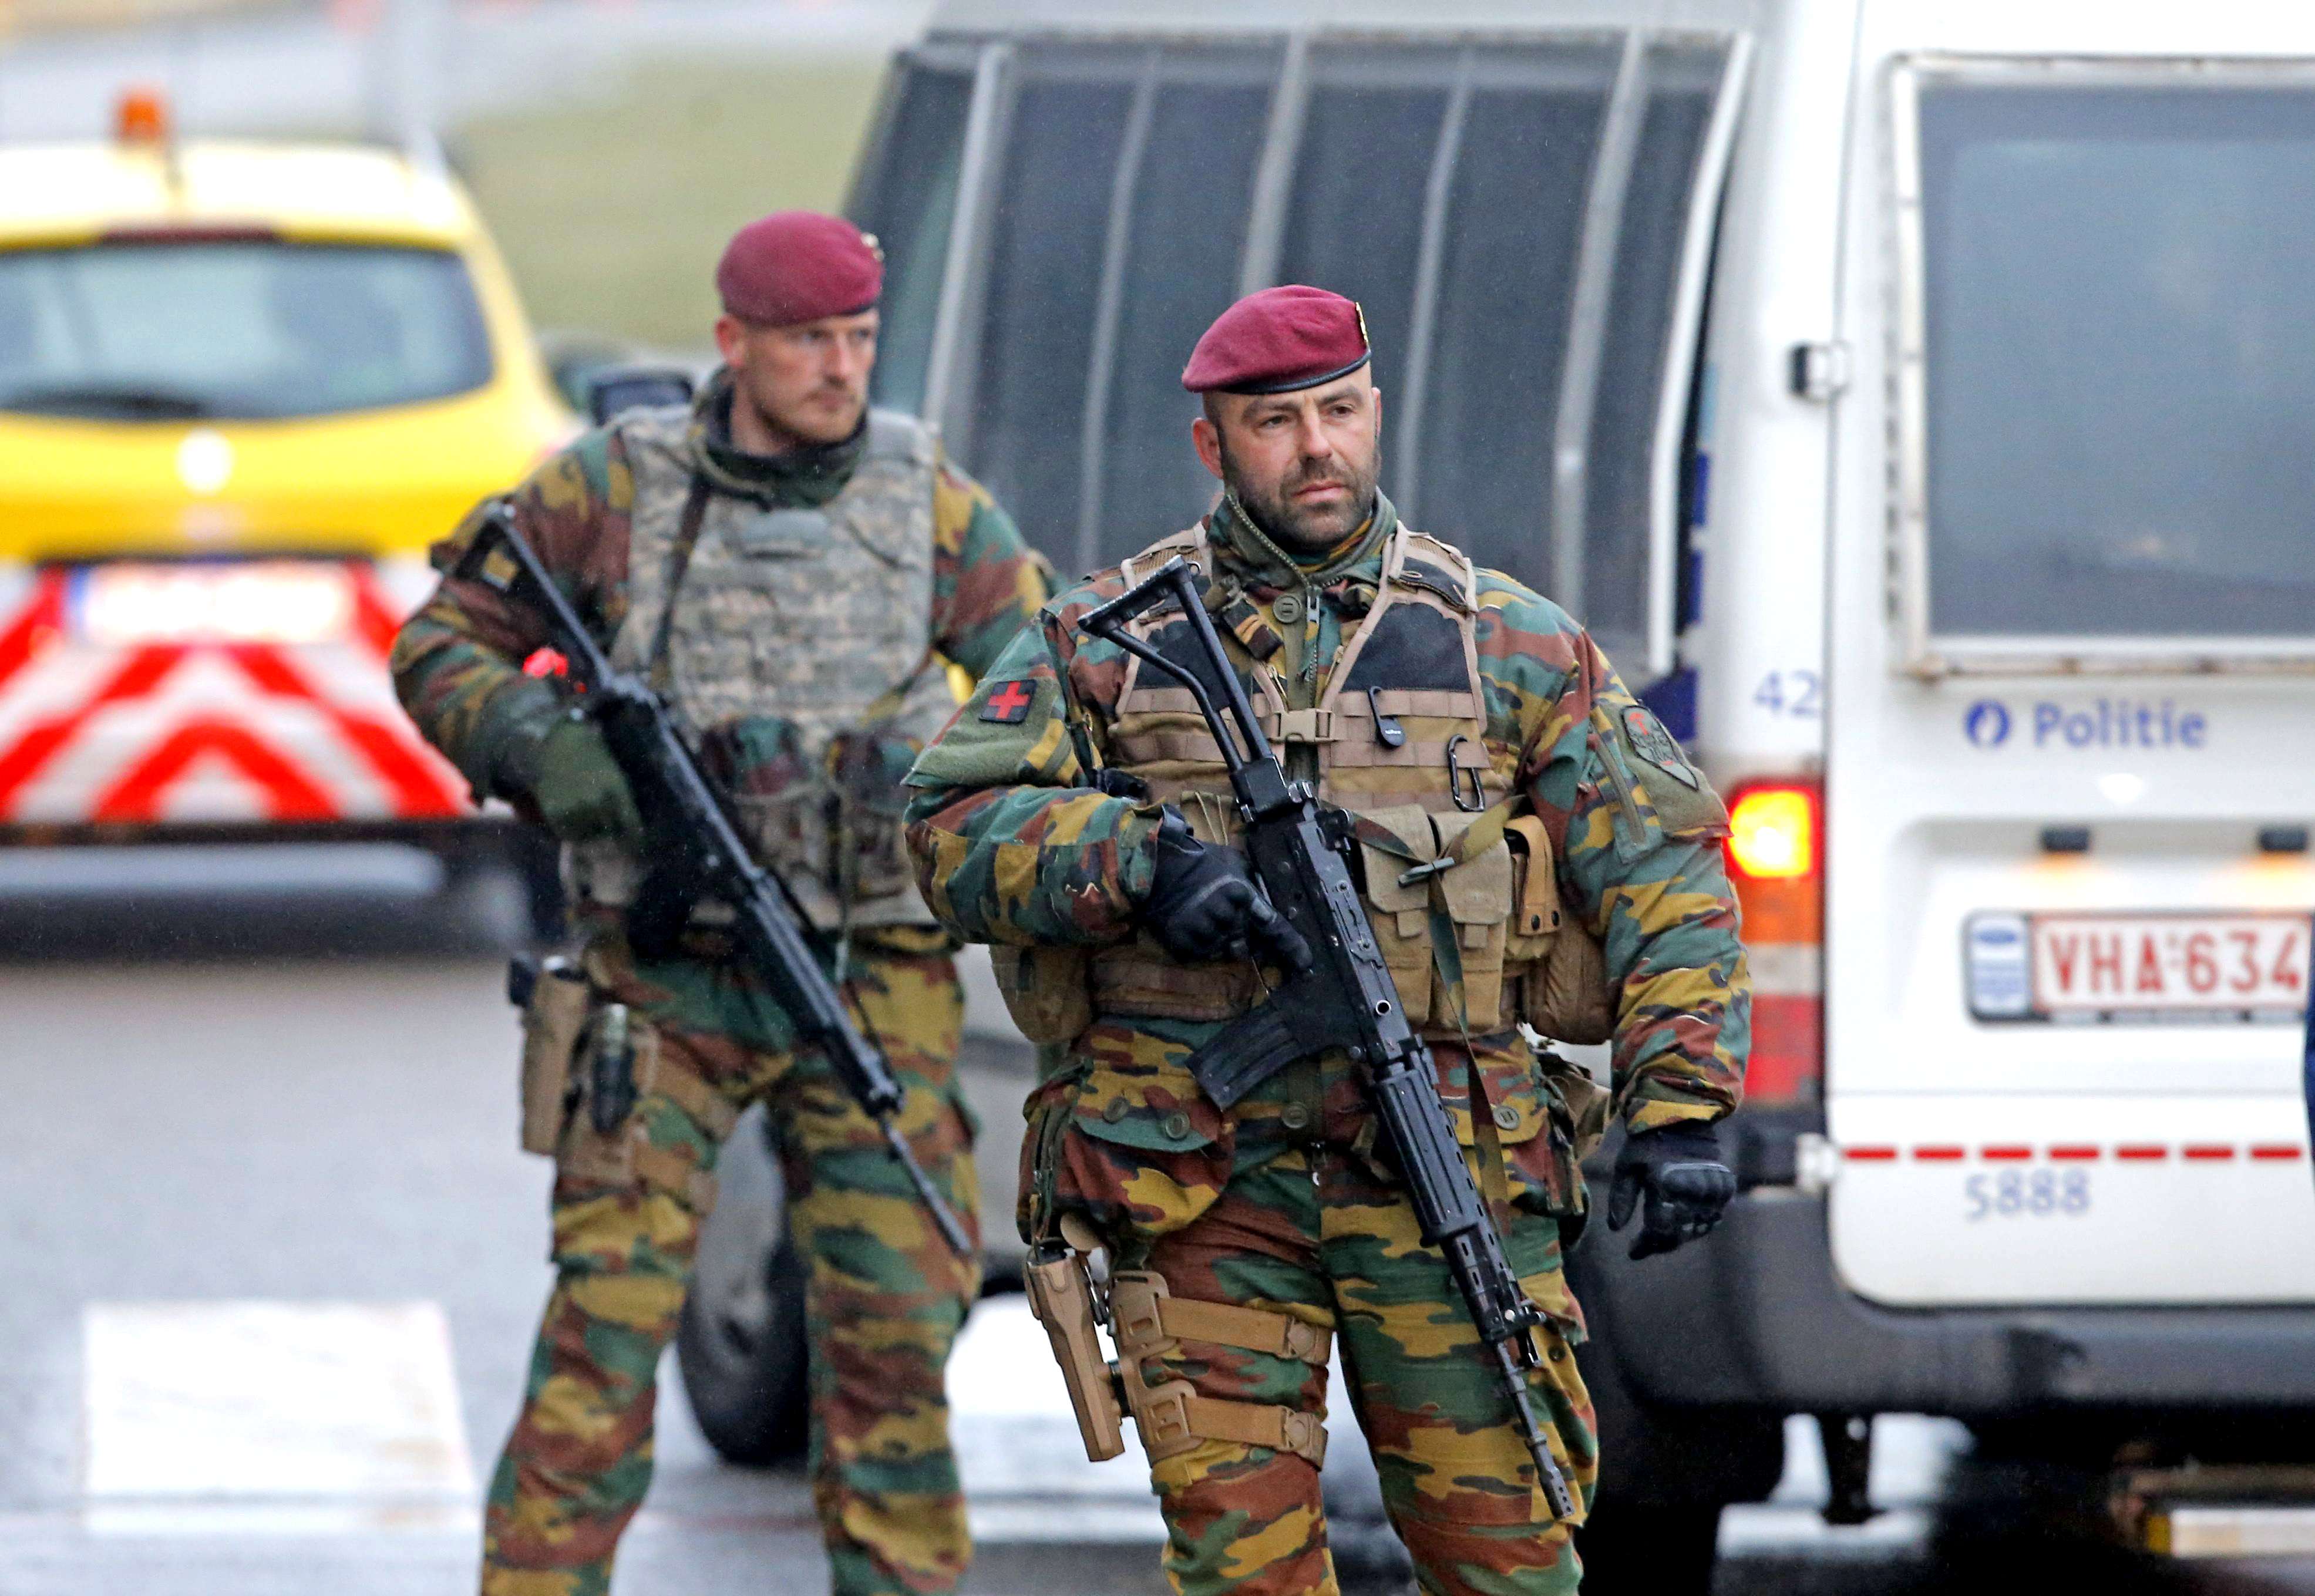 Belgian soldiers check vehicles of airport workers on their arrival at Zaventem airport in Brussels, Belgium. Security services are on high alert following two explosions in the departure hall of Zaventem Airport and later one at Maelbeek Metro station in Brussels yesterday. Photo: EPA